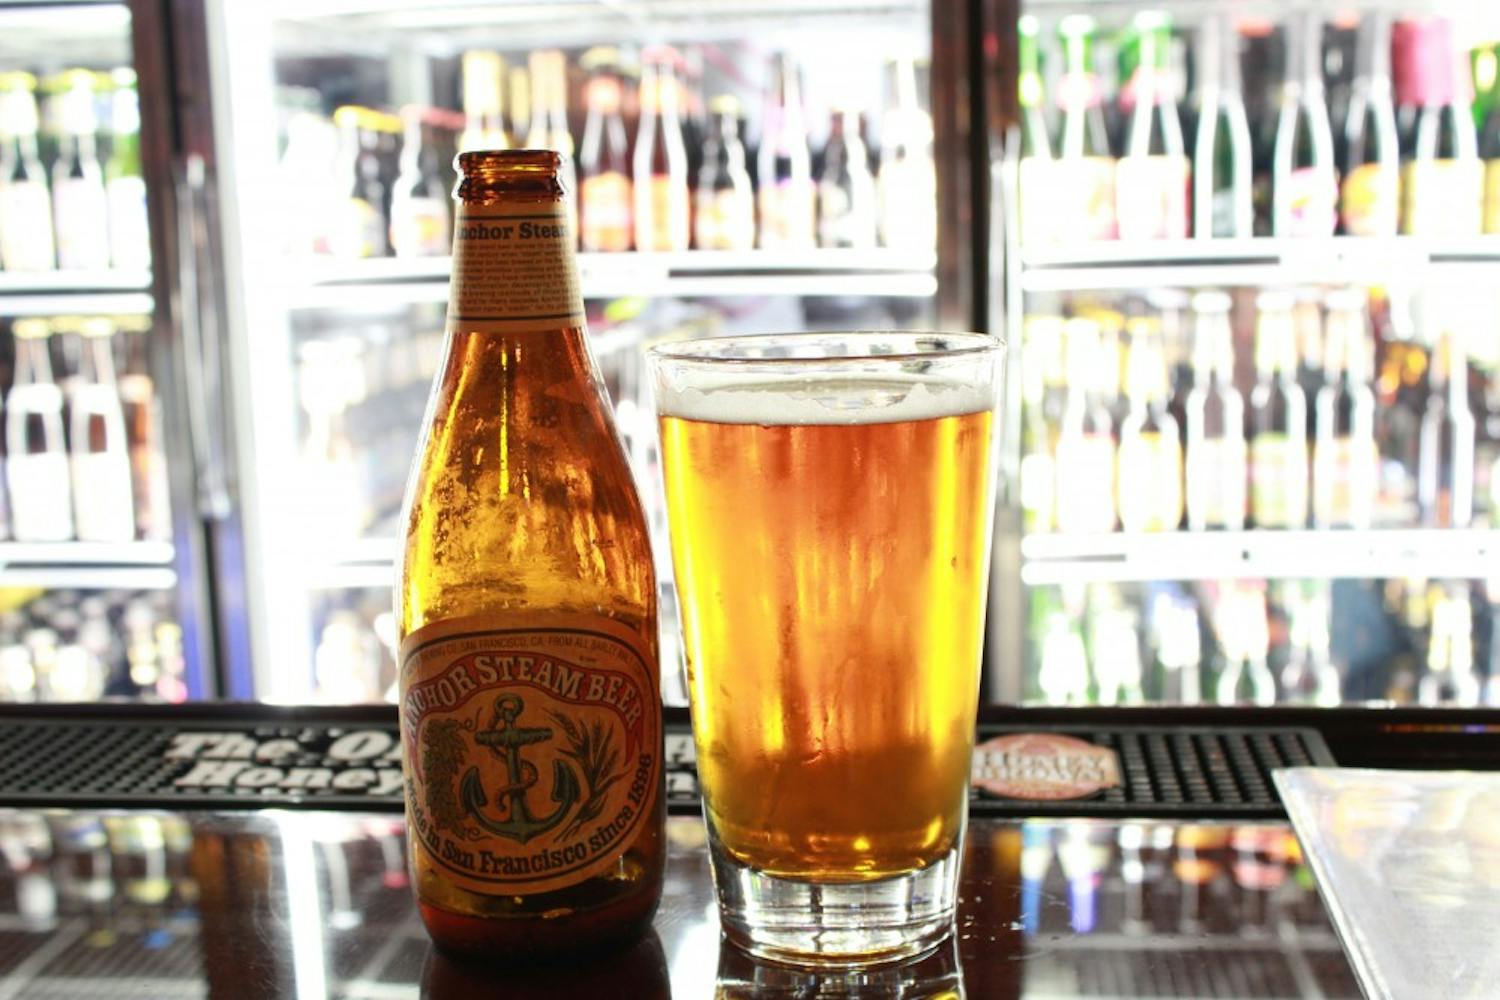 One of the many beers WOB has to offer.
Photo by Mike Brilliant